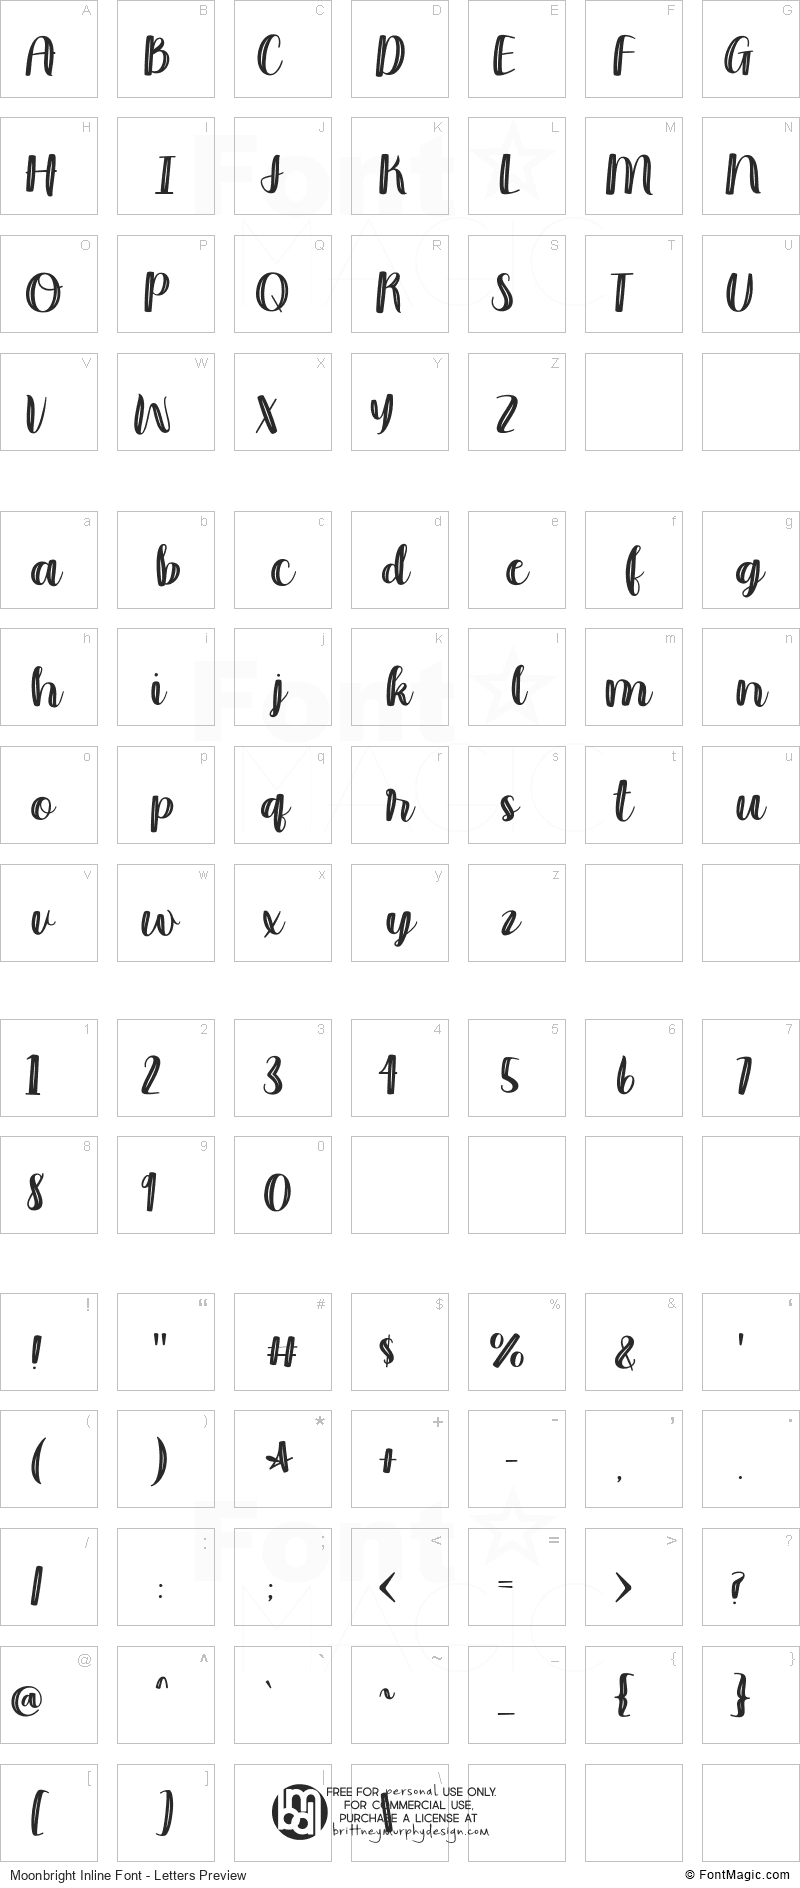 Moonbright Inline Font - All Latters Preview Chart